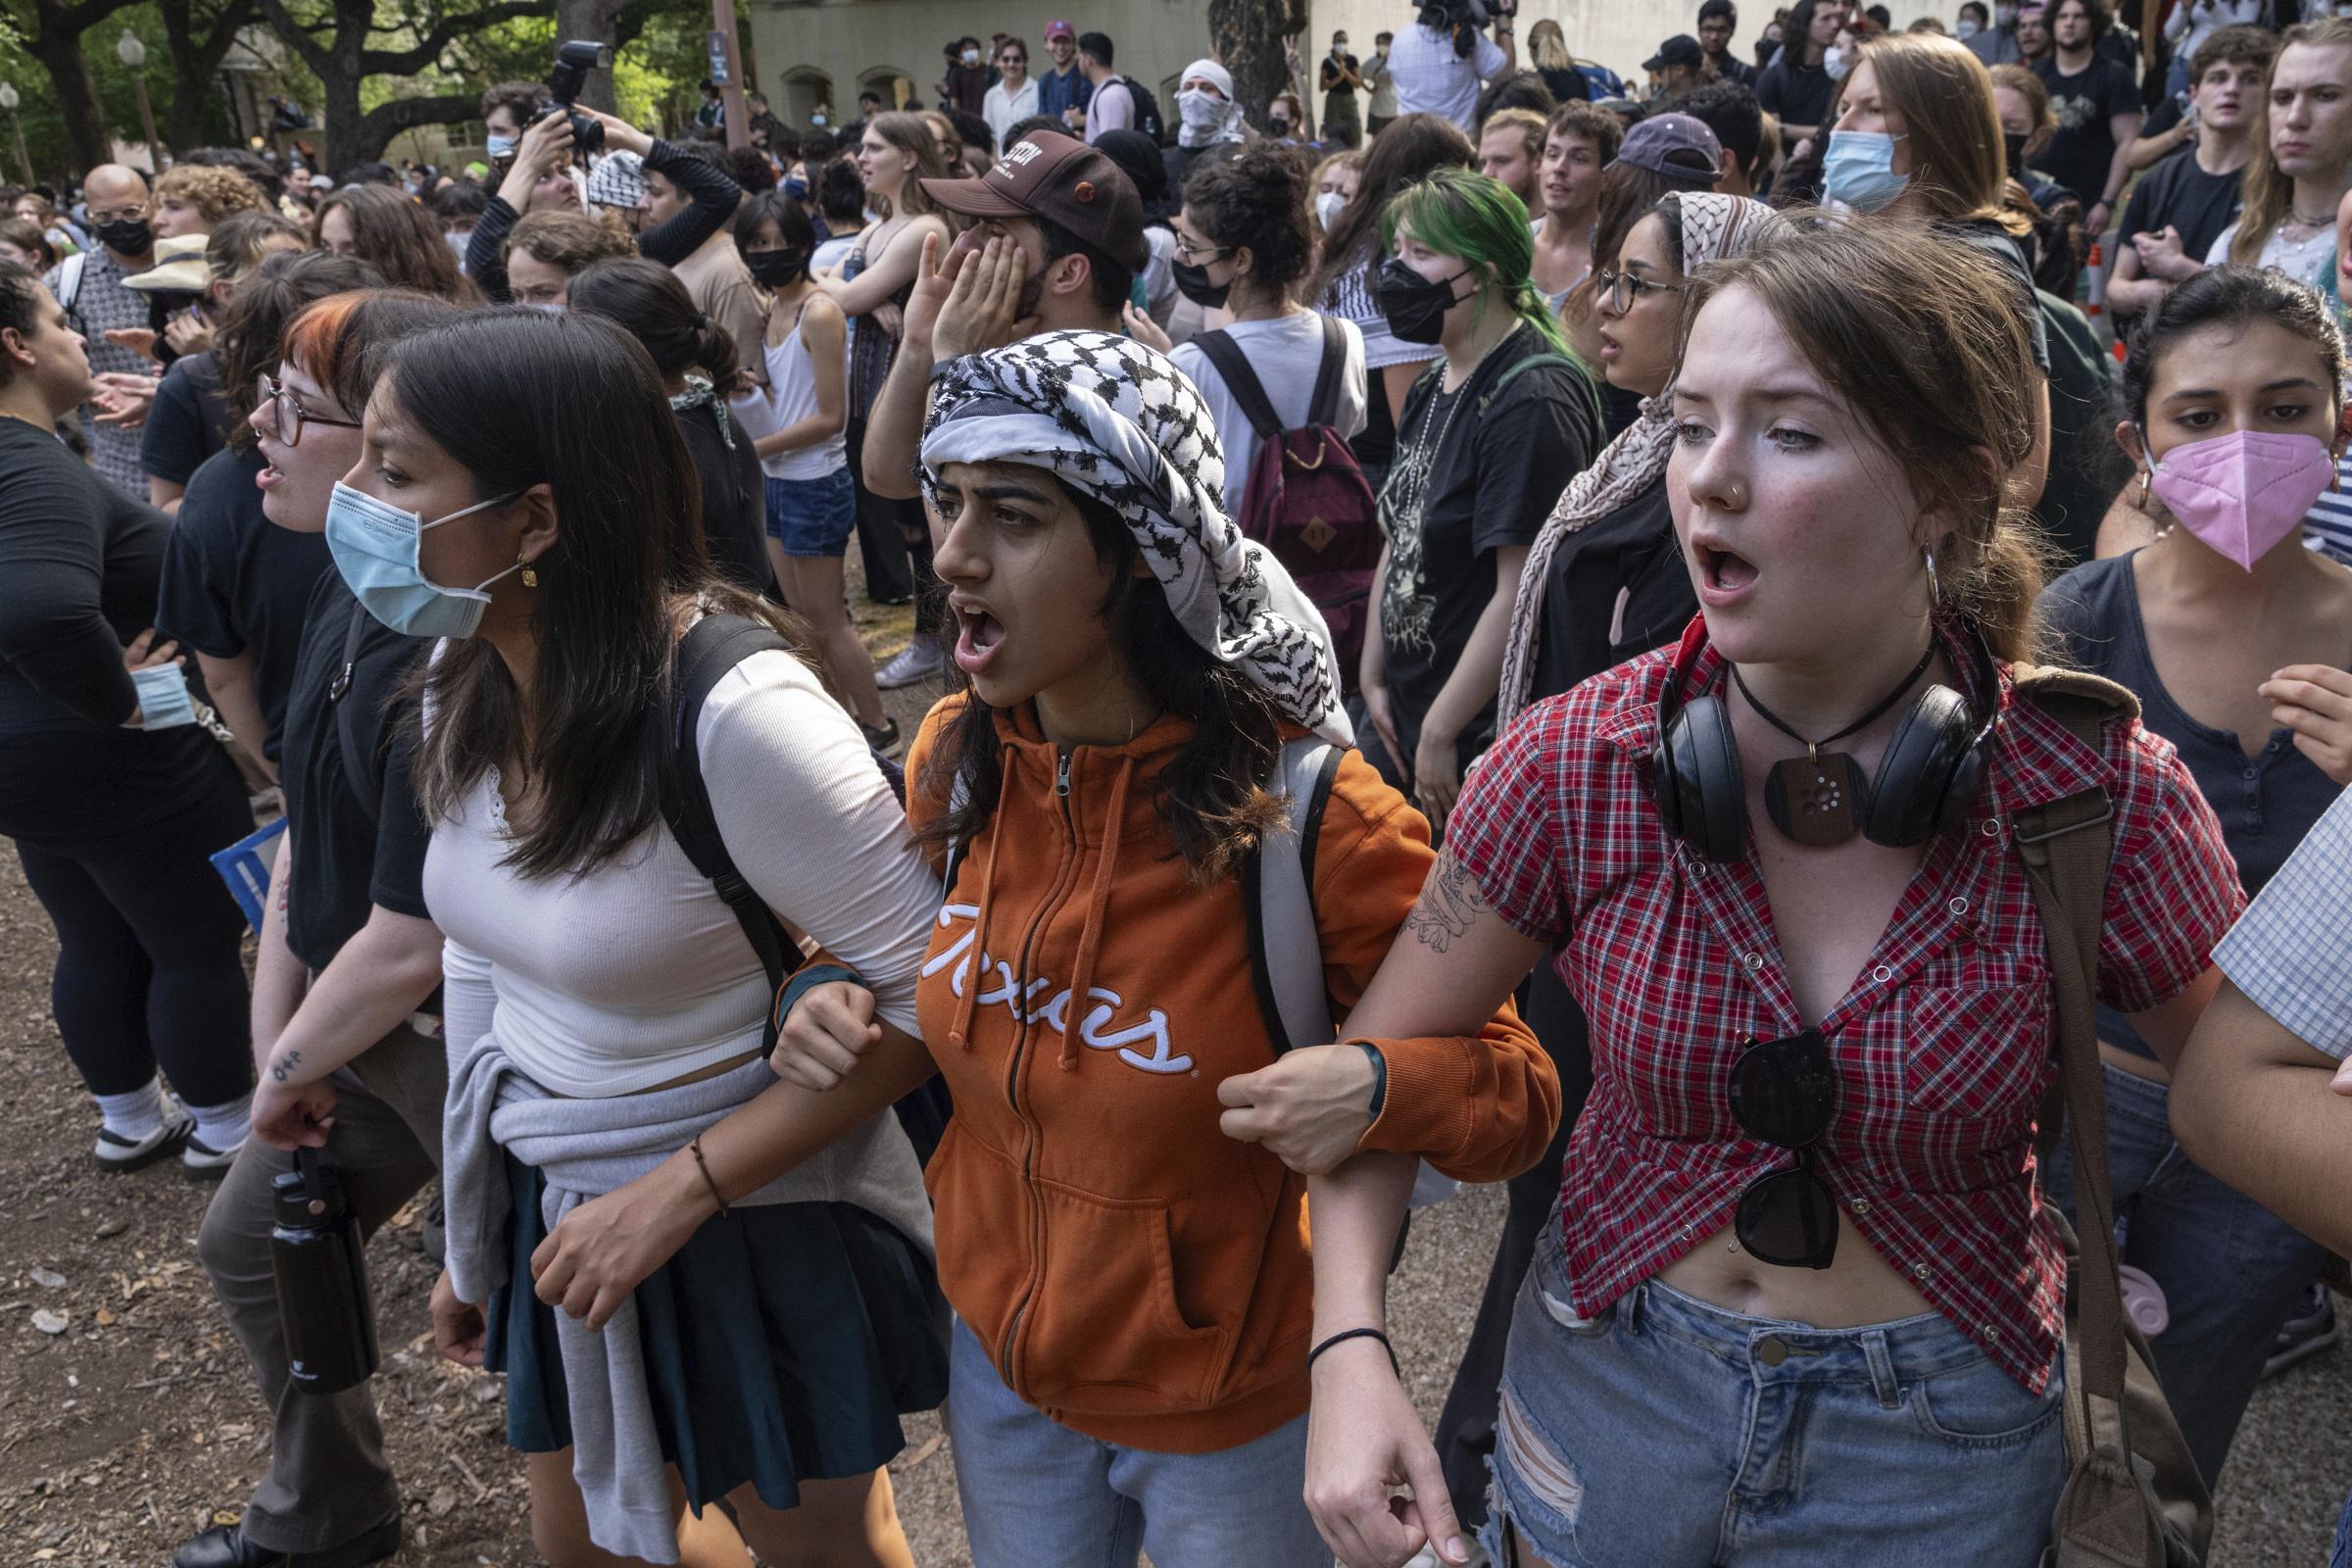 Campus demonstrations against Israel's actions in Gaza intensify (Credits: Washington Times)